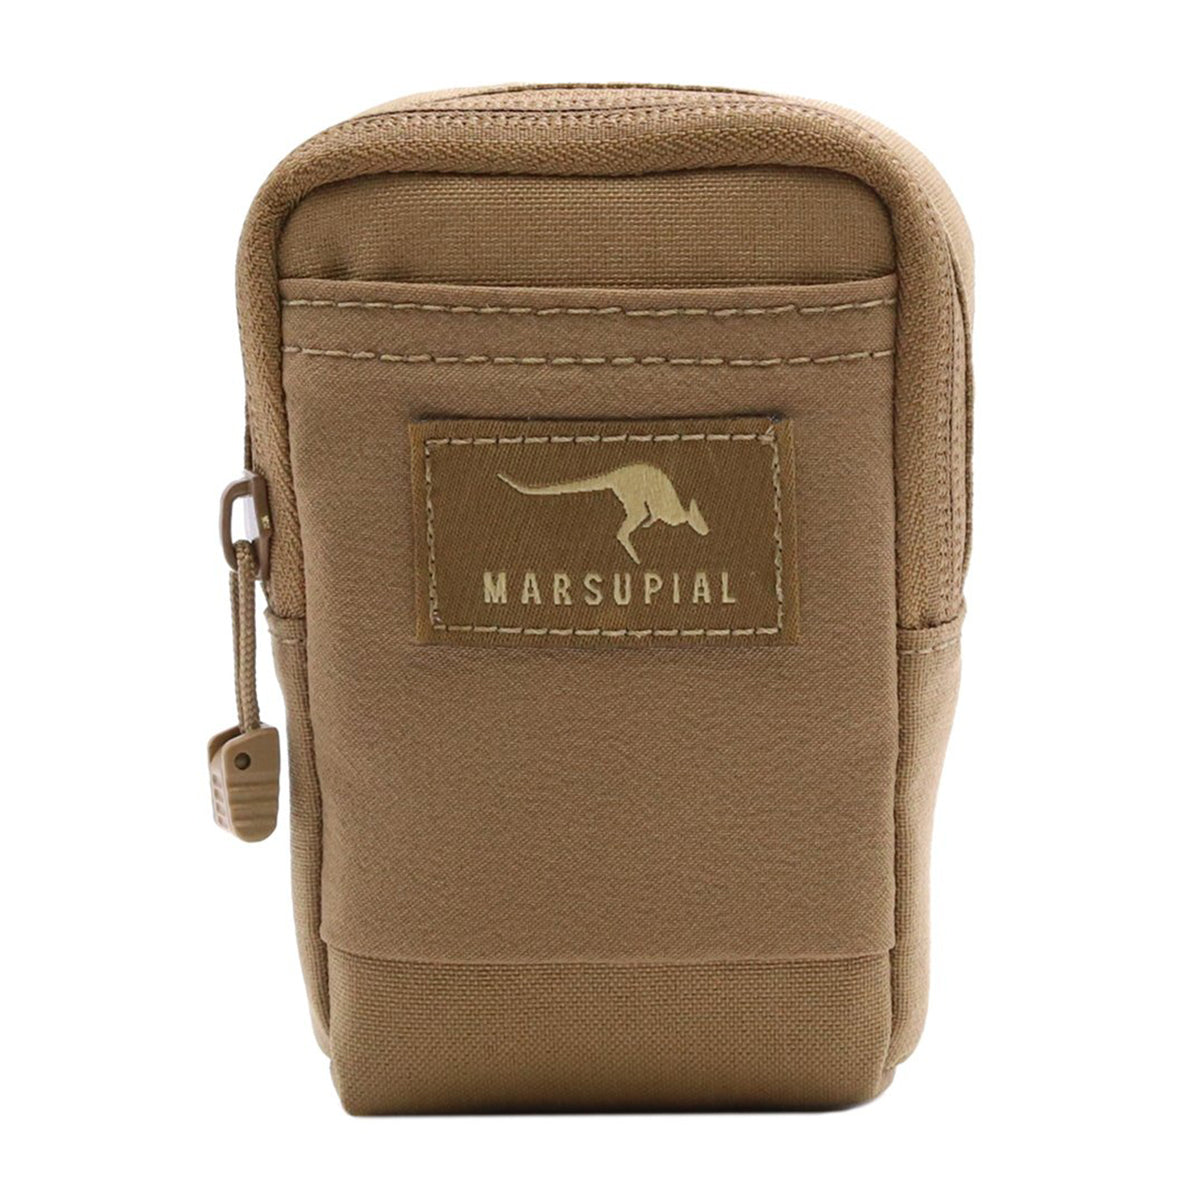 Marsupial Gear Small Zippered Pouch by Marsupial Gear | Optics - goHUNT Shop